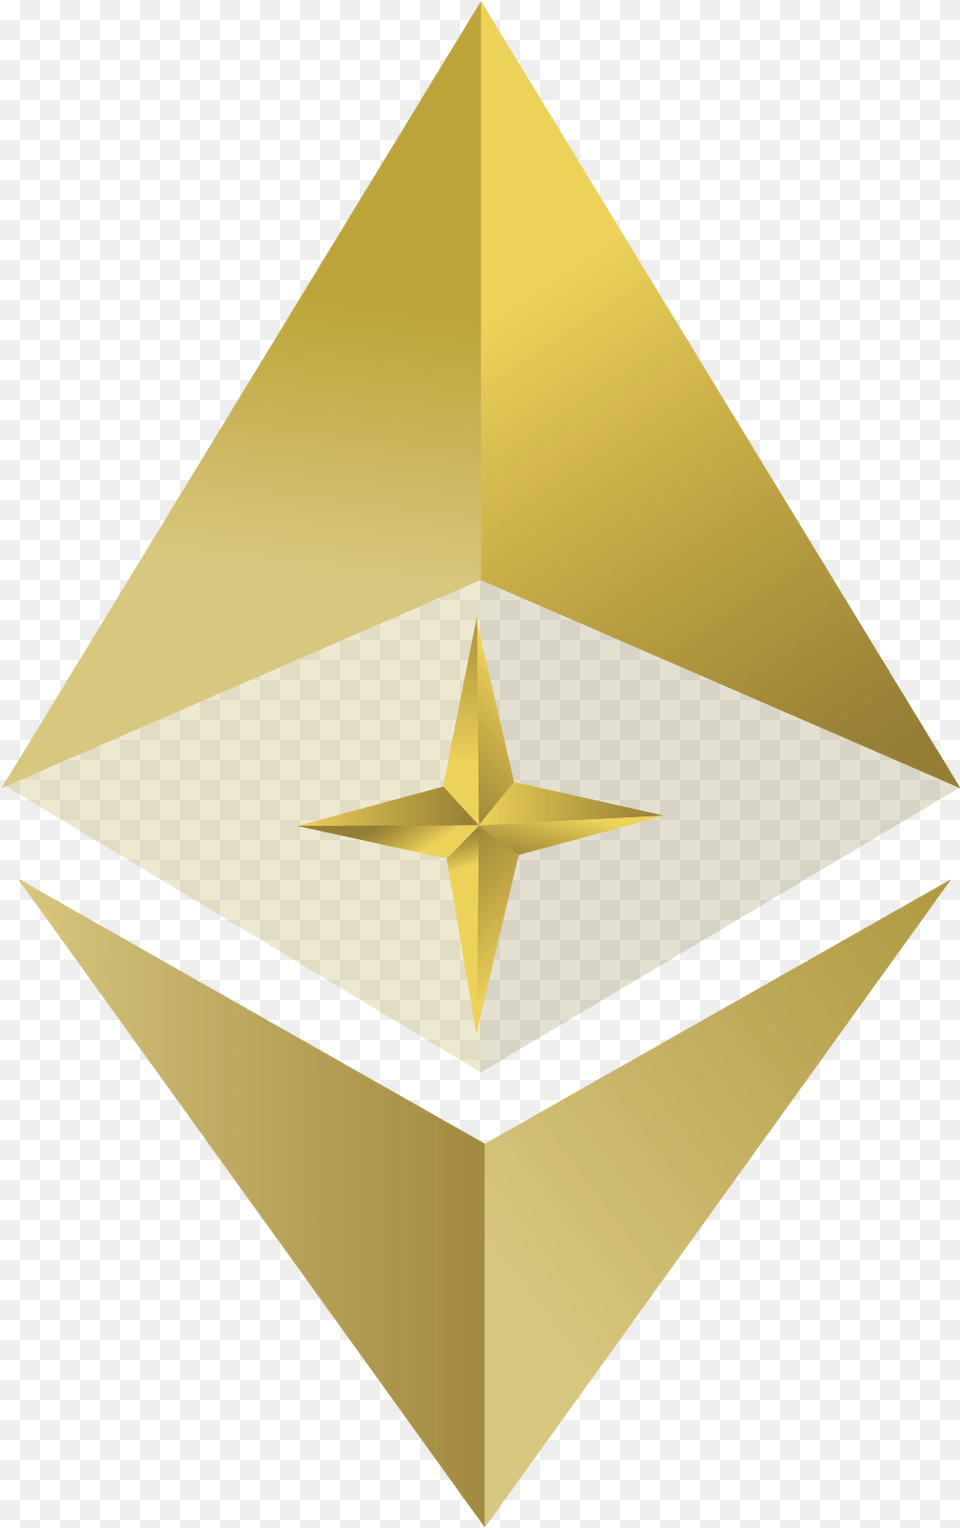 Offering Gold Initial Bitcoin Virtual Currency Ethereum Triangle Png Image